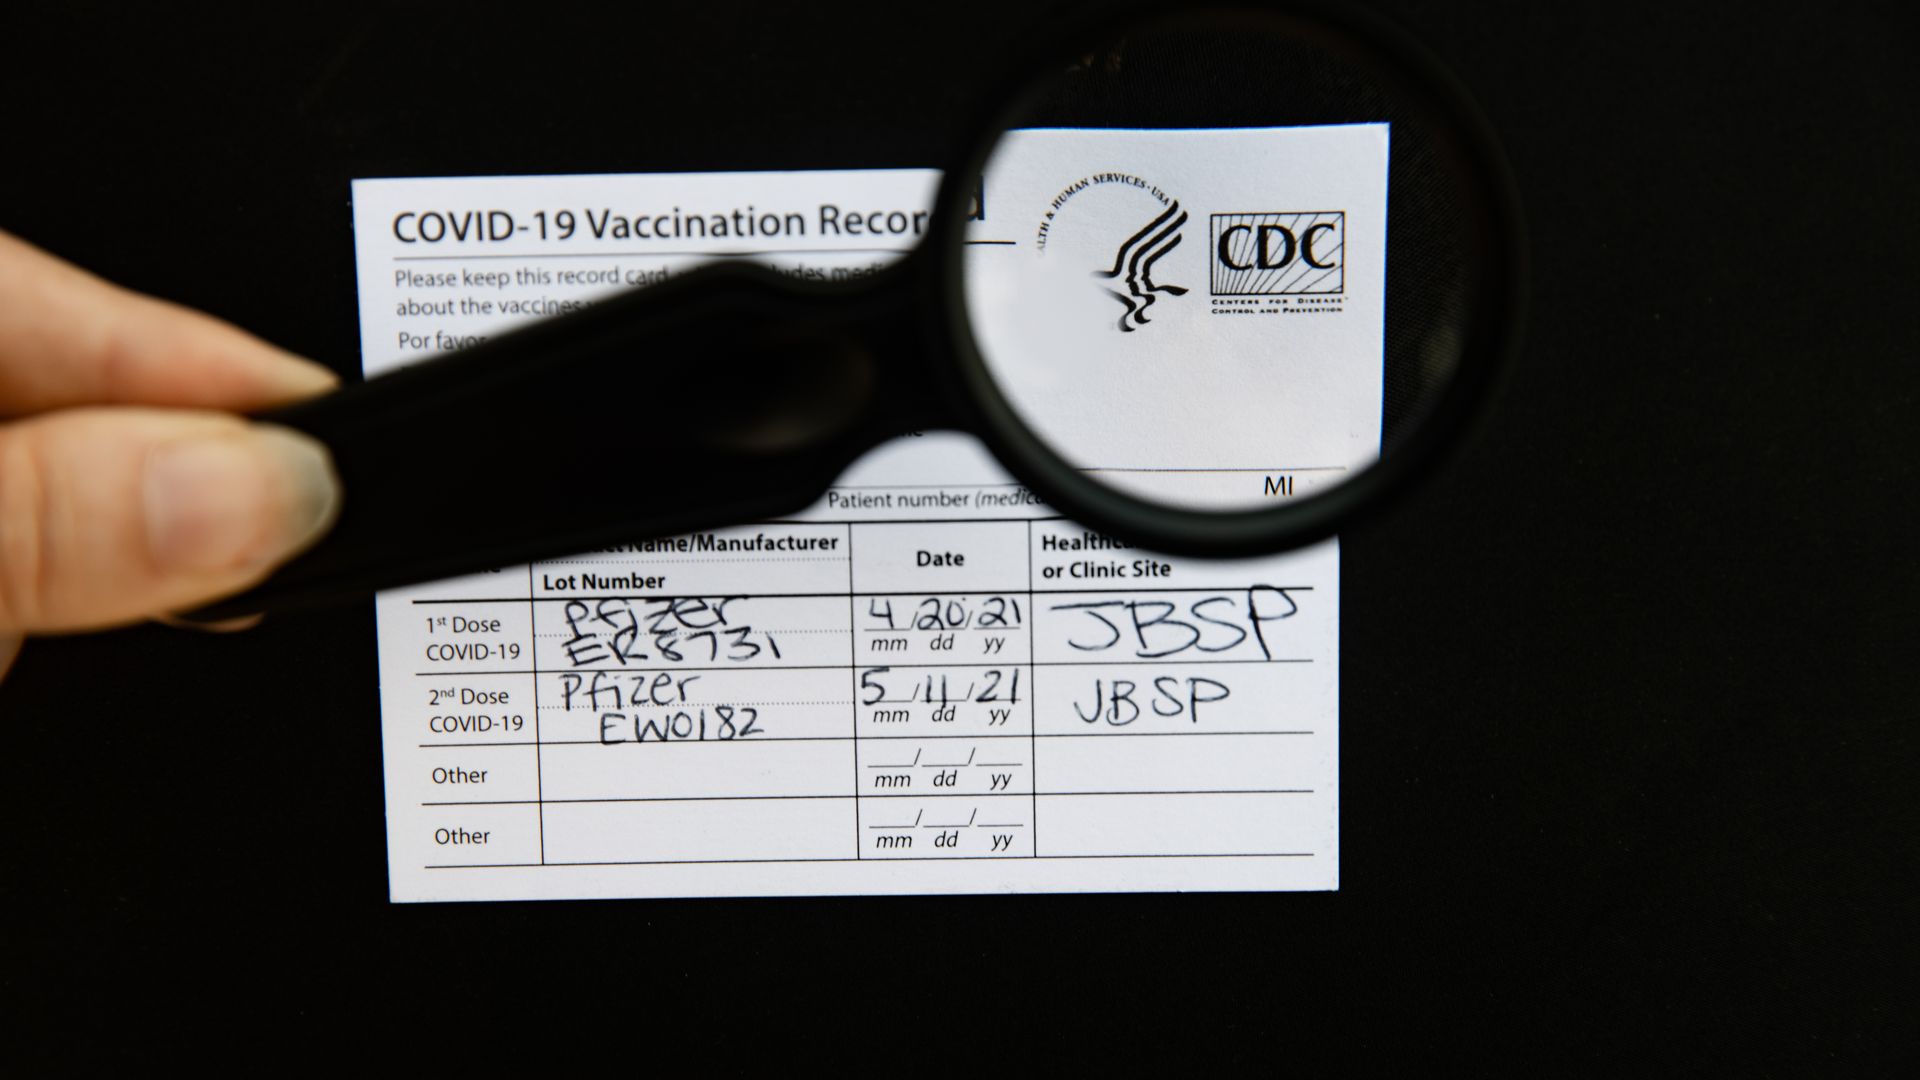 A covid-19 vaccine card with a magnifying glass over the CDC logo